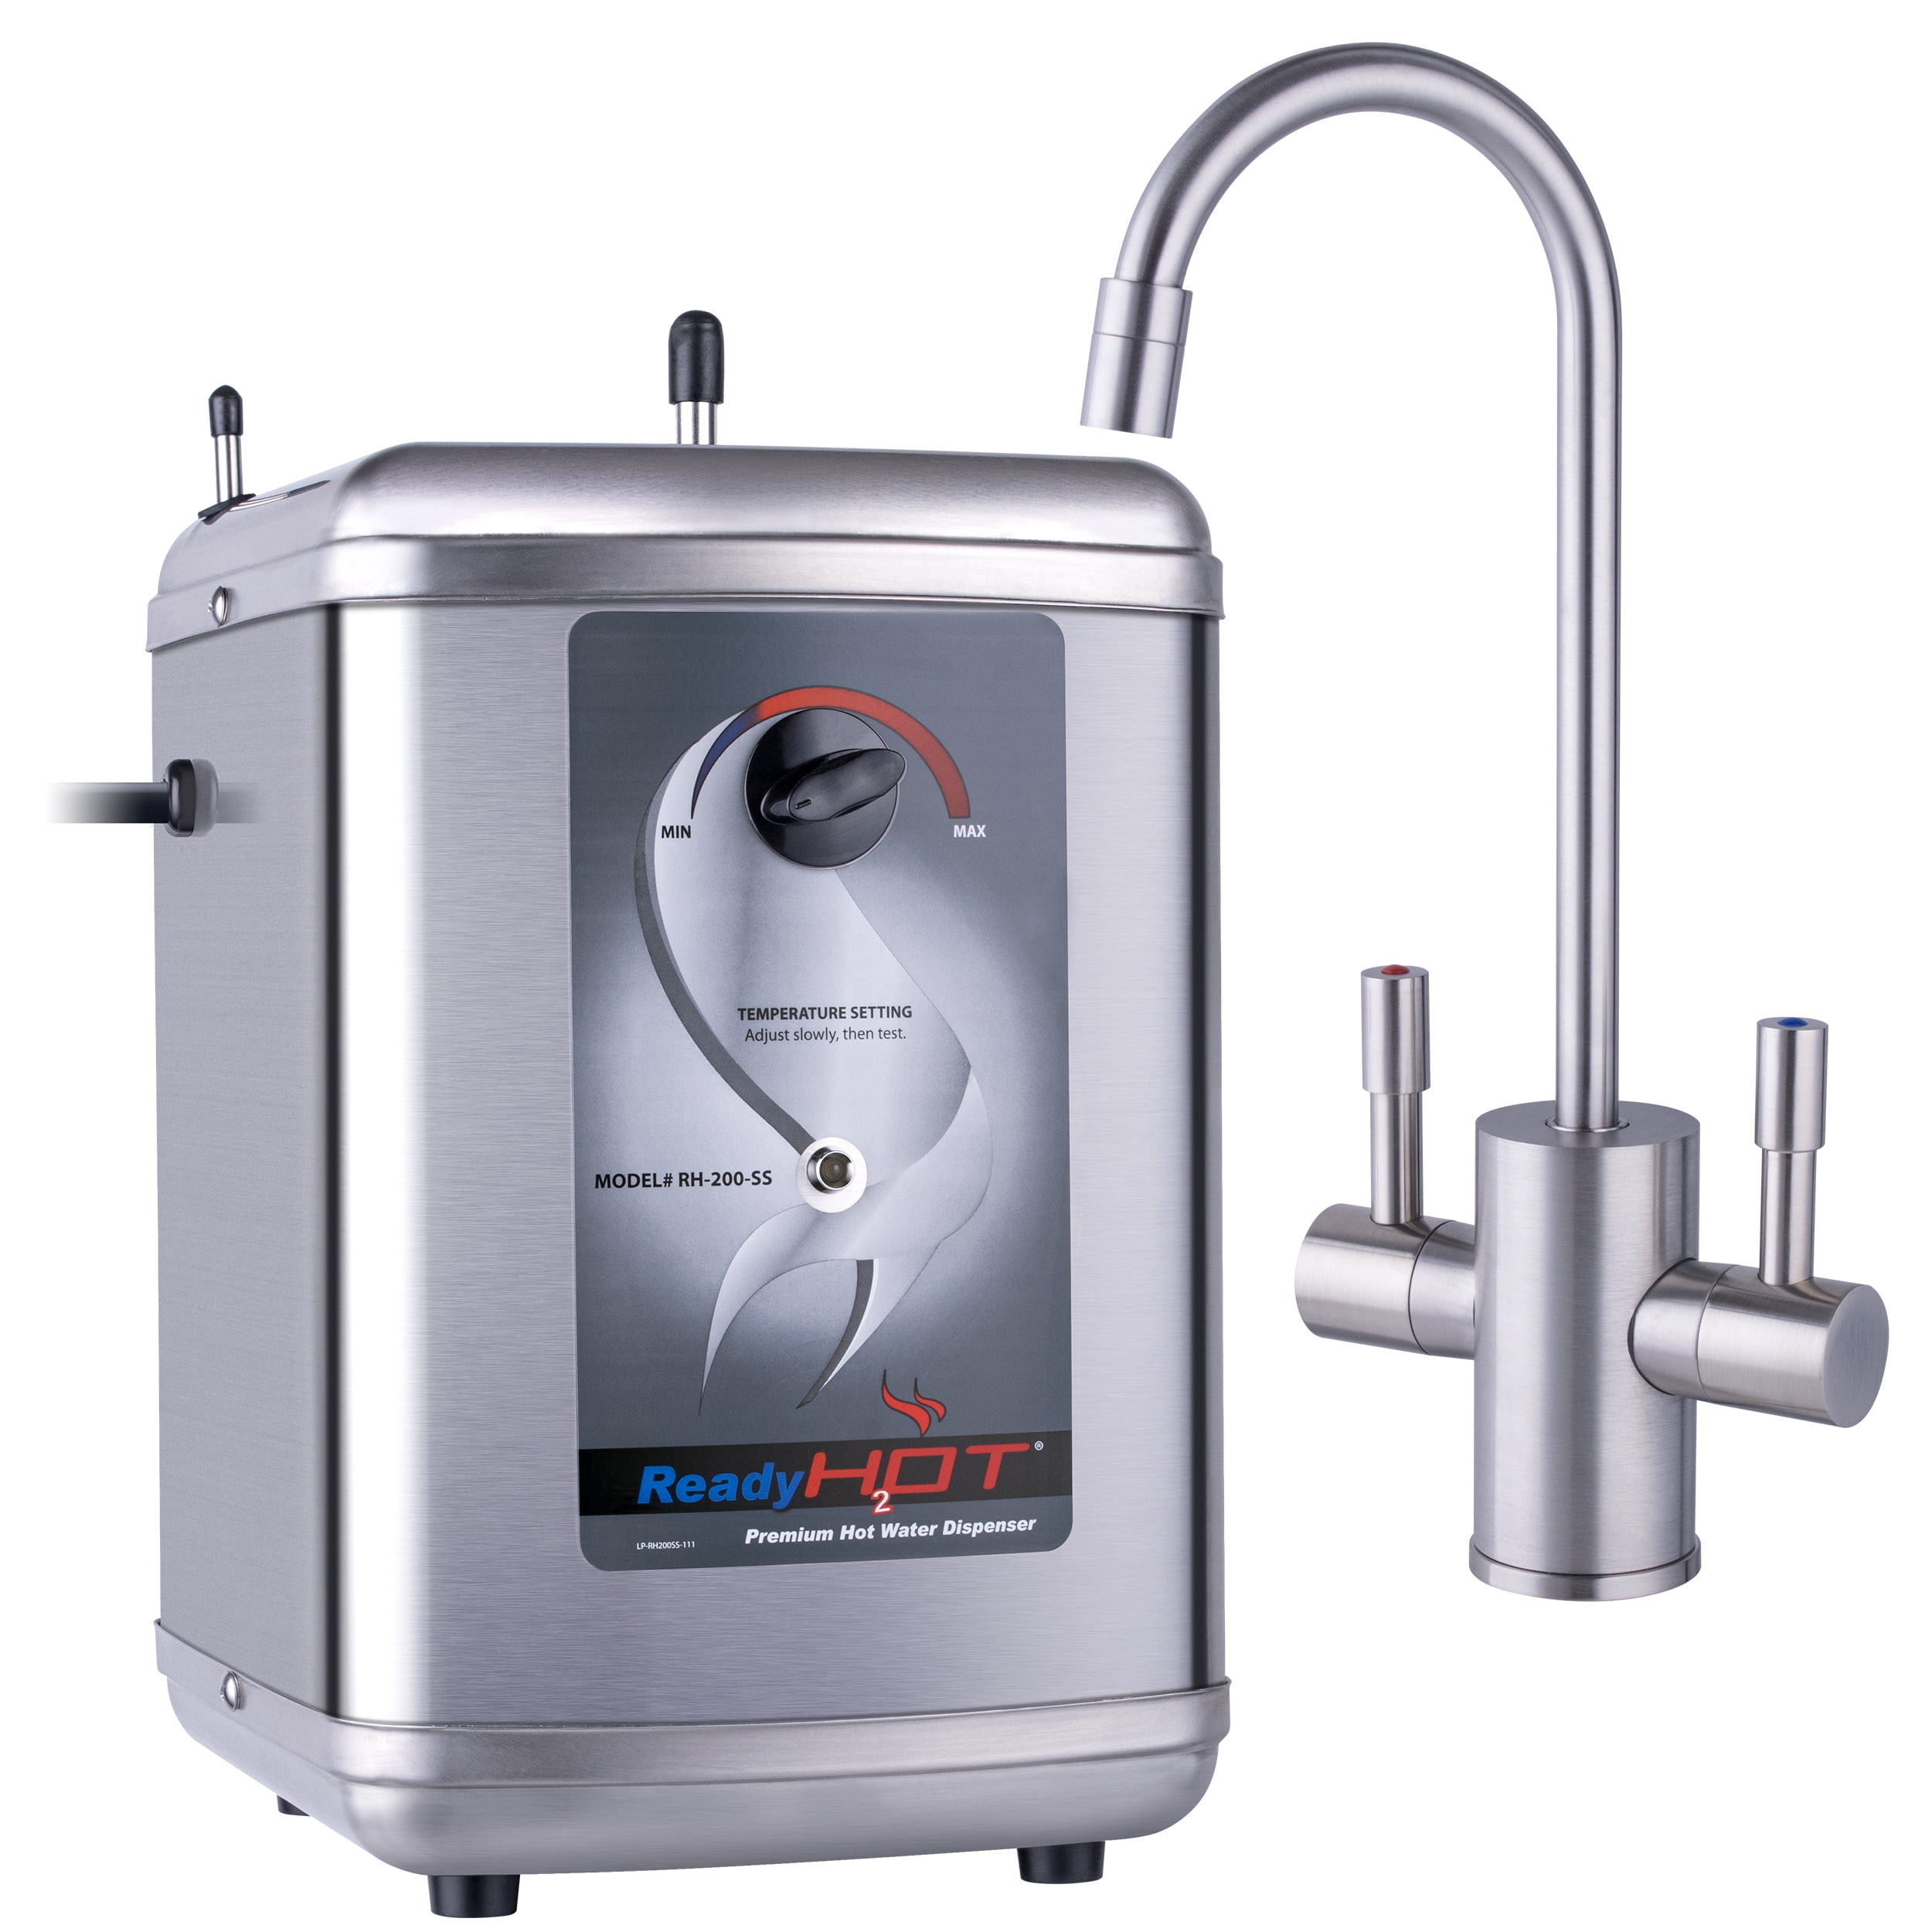 InstaHot Hot Water Tank – Water and Filter